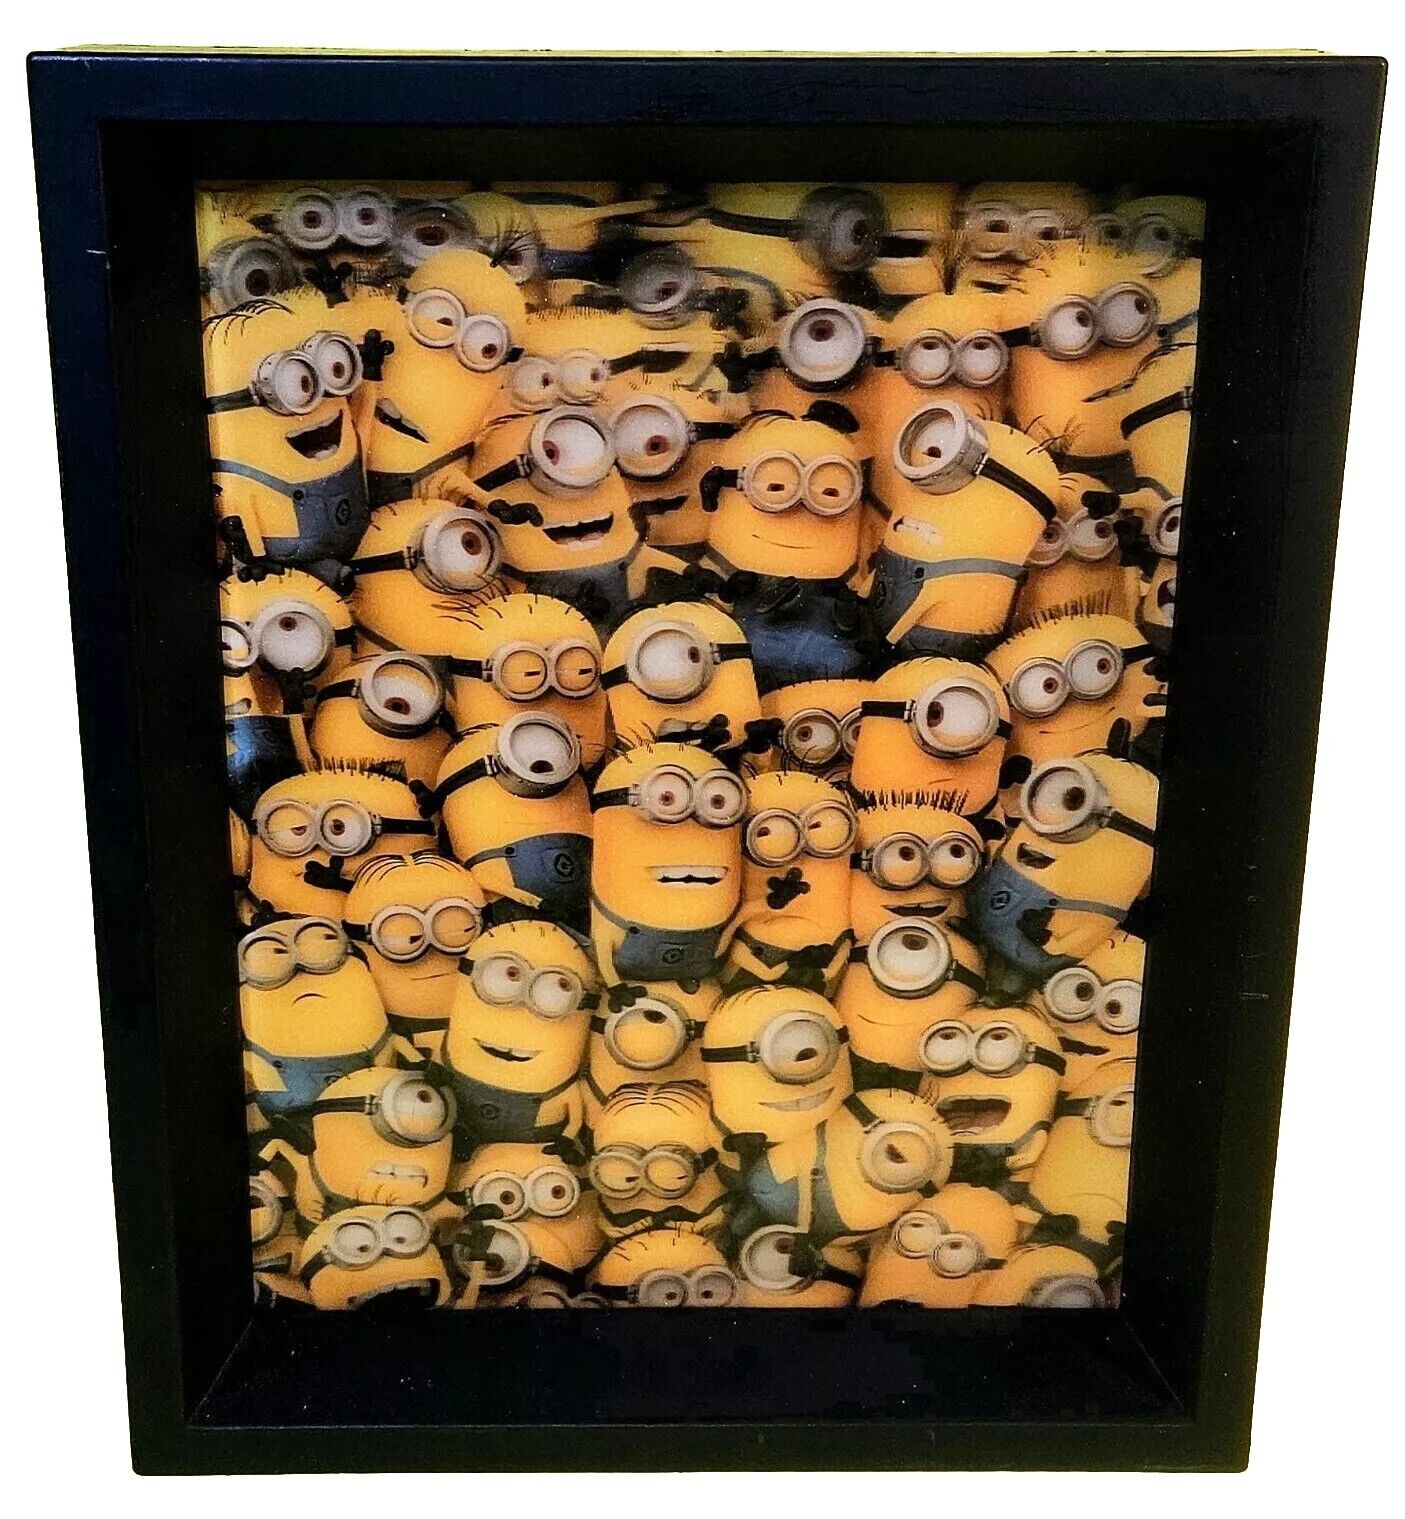 Despicable Me/Minions Poster 3D Shadow Box Framed Wall Art/Decor Photo Picture